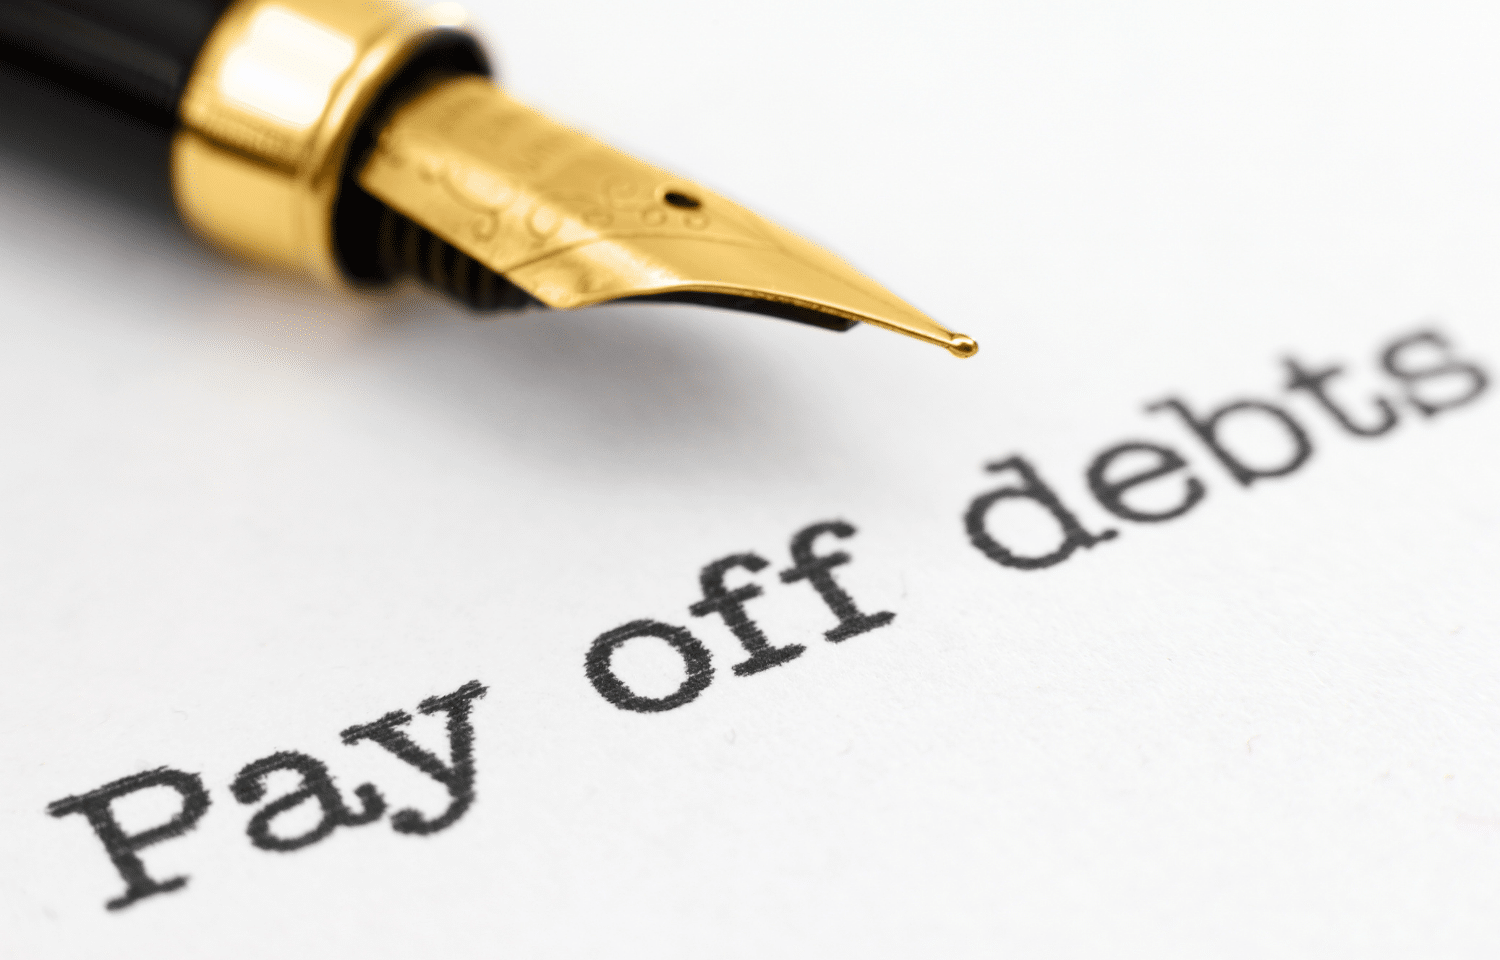 Plans for paying off debt quickly